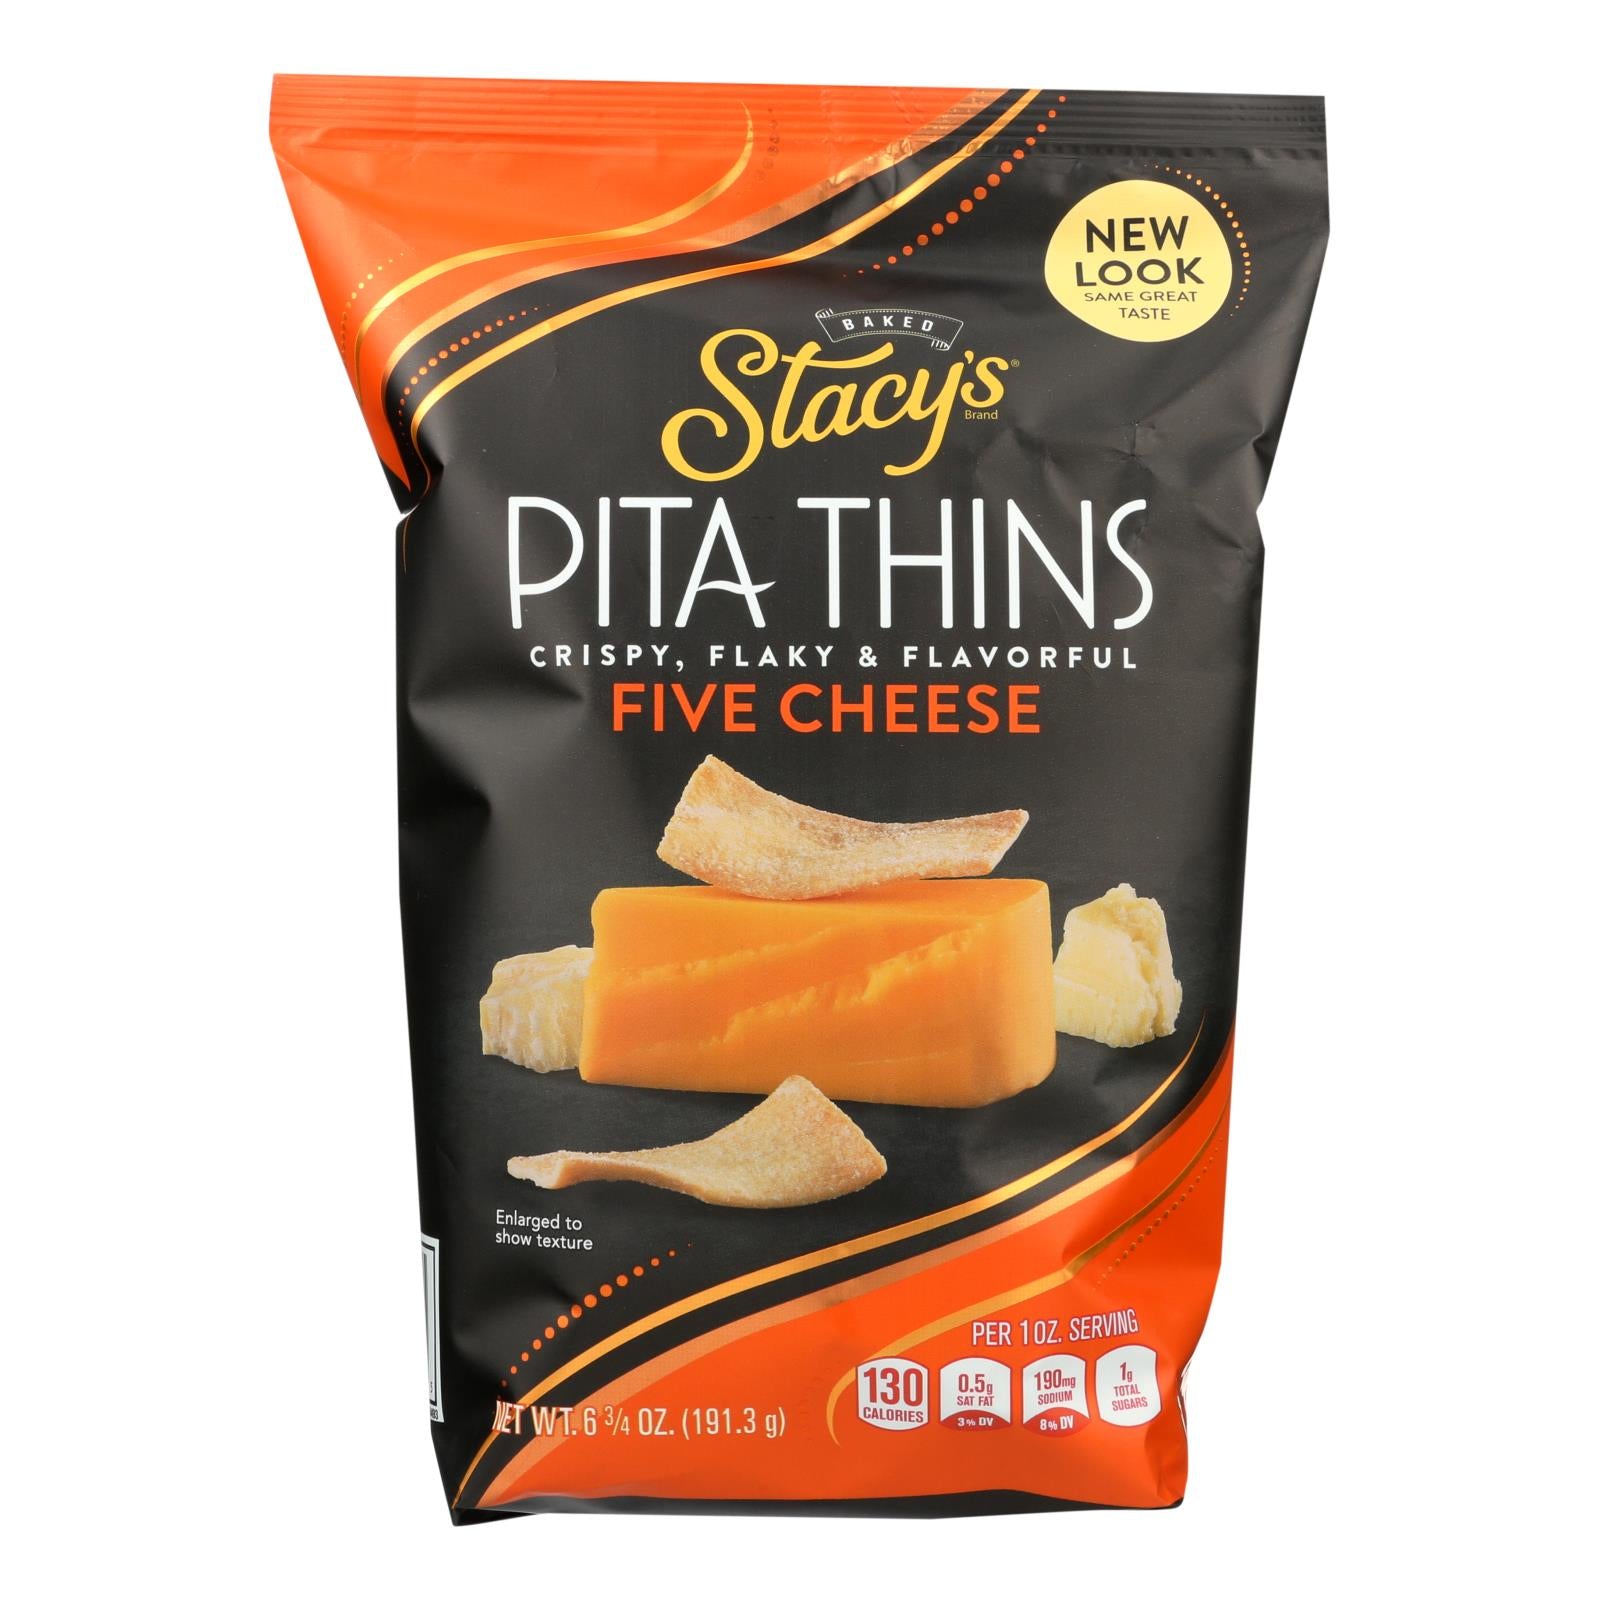 Stacy's Pita Chips 5 Cheese Pita Crisps - Cheese - Case Of 8 - 6.75 Oz.